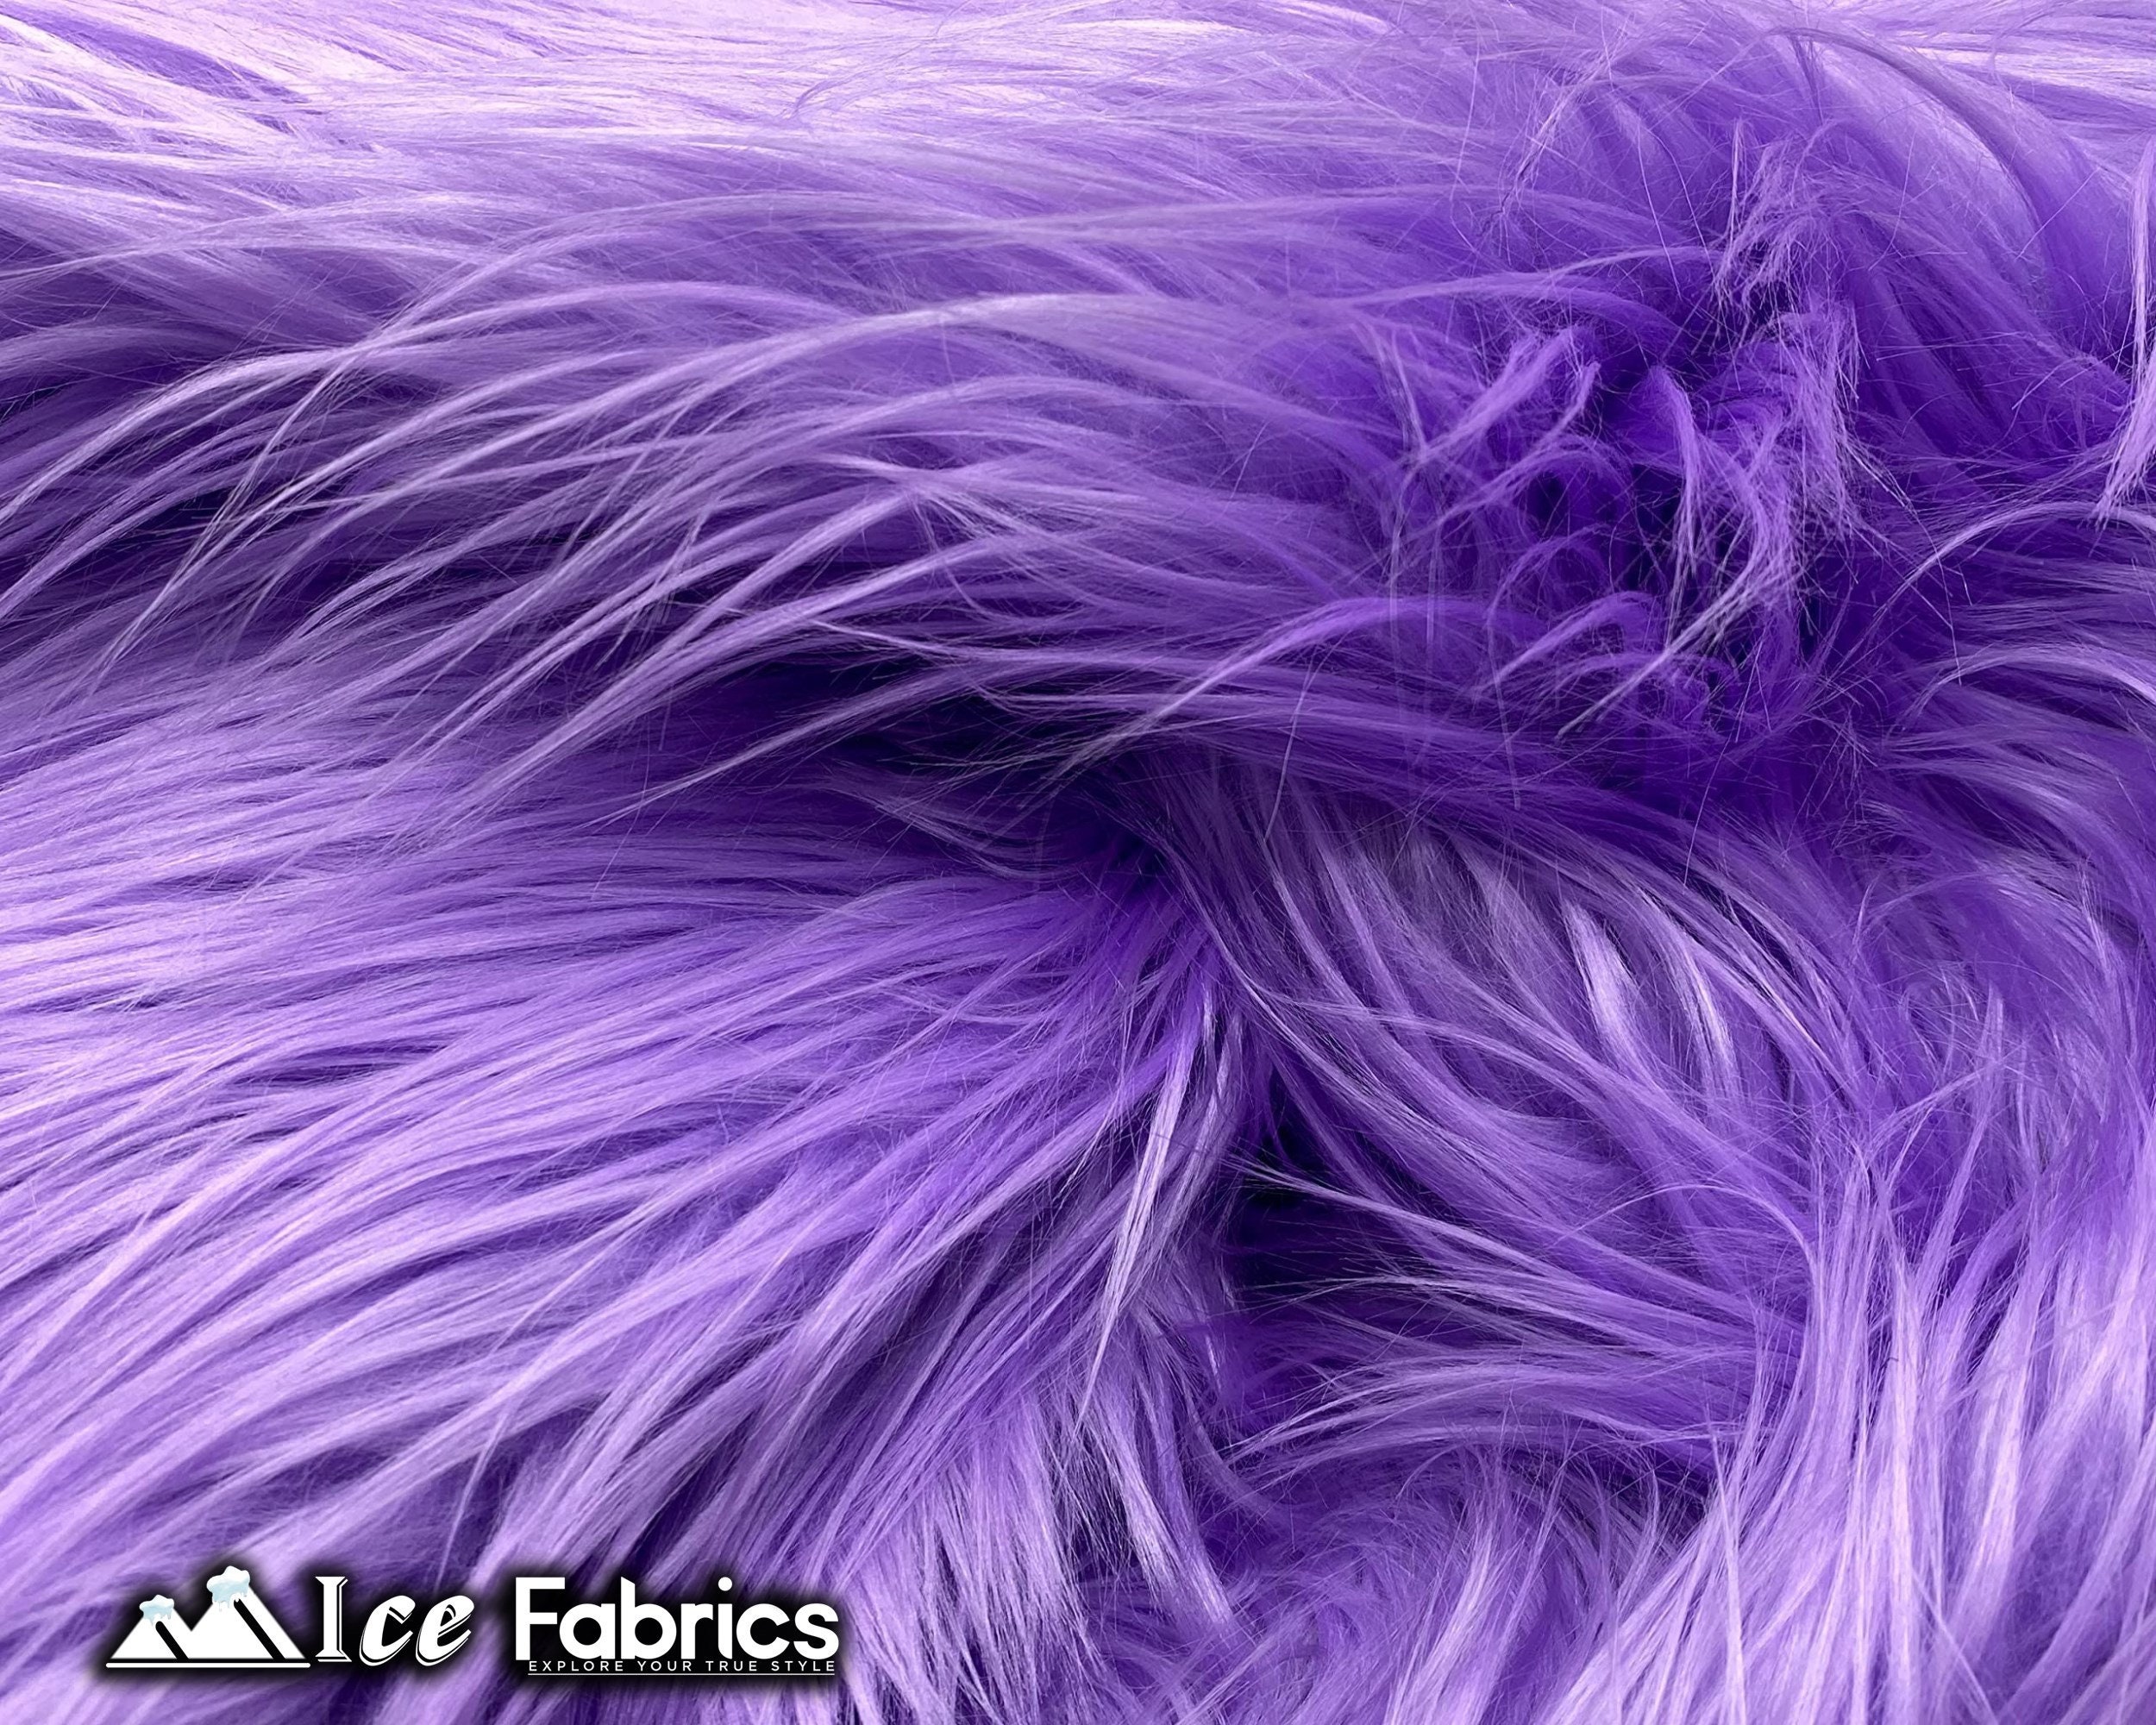 White Shaggy Mohair Animal Long Pile Faux Fur Fabric by the Yard Fake Fur  Material 60 Wide Solid and Soft 